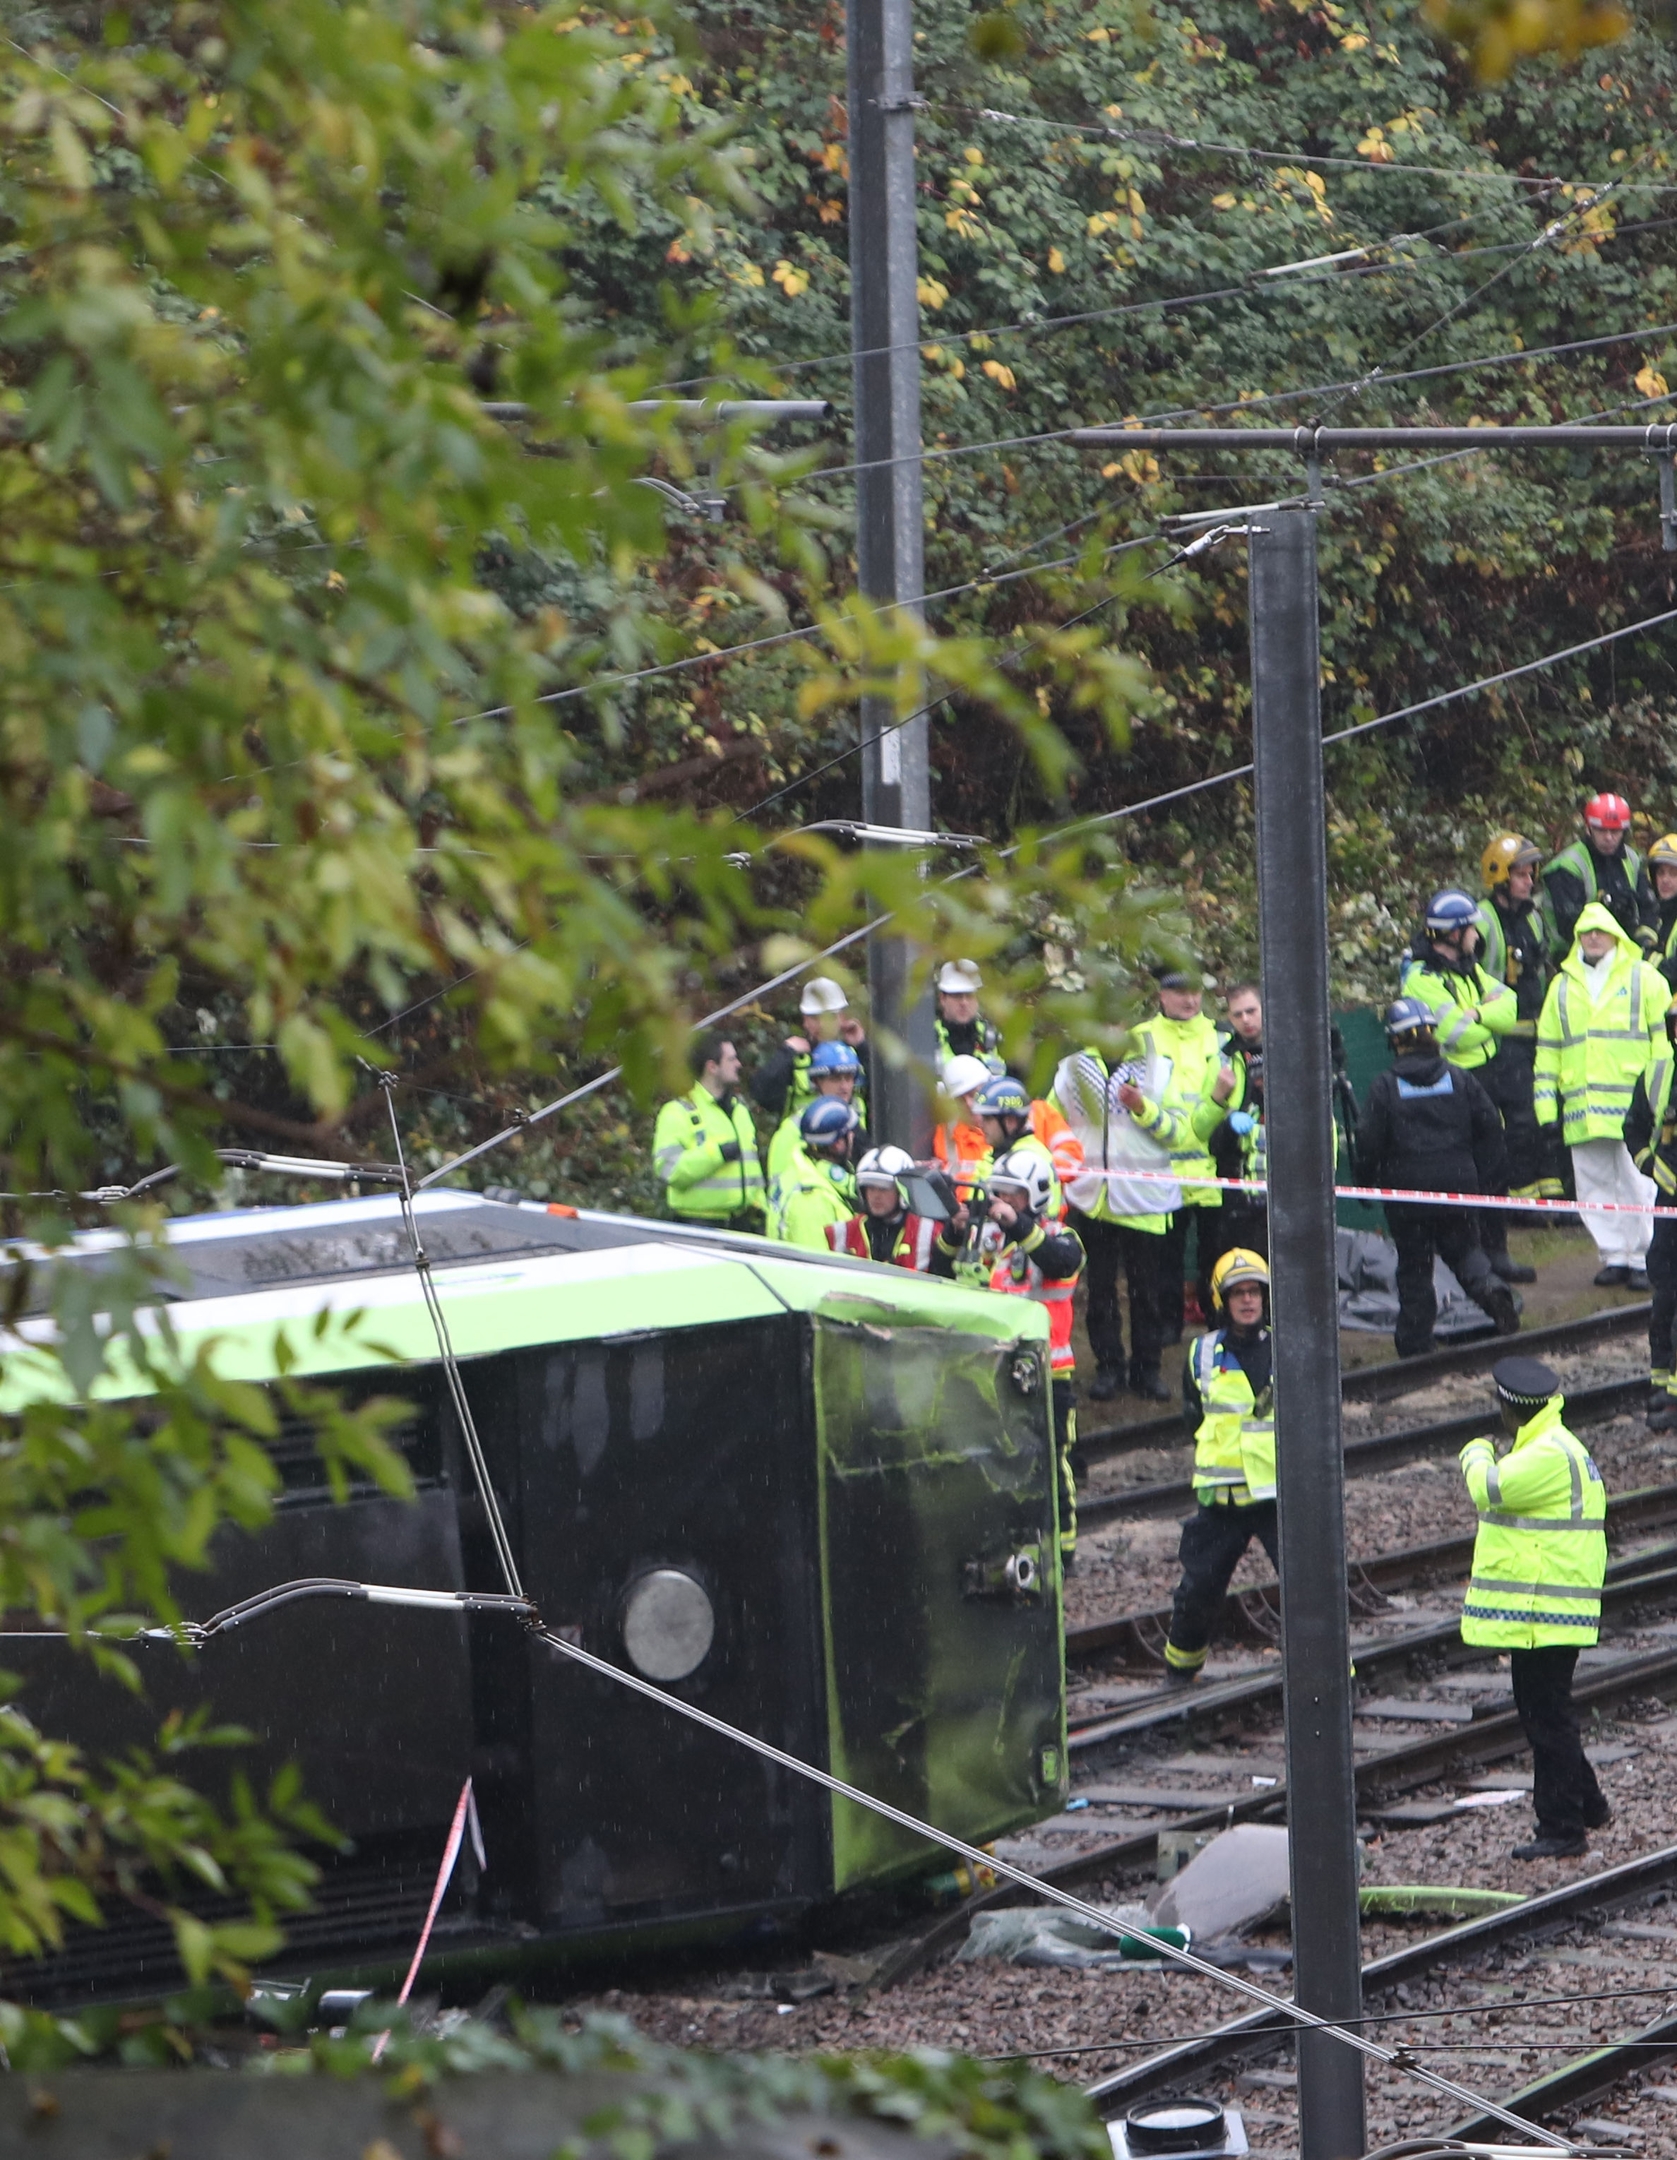 The scene after a tram overturned in Croydon, south London